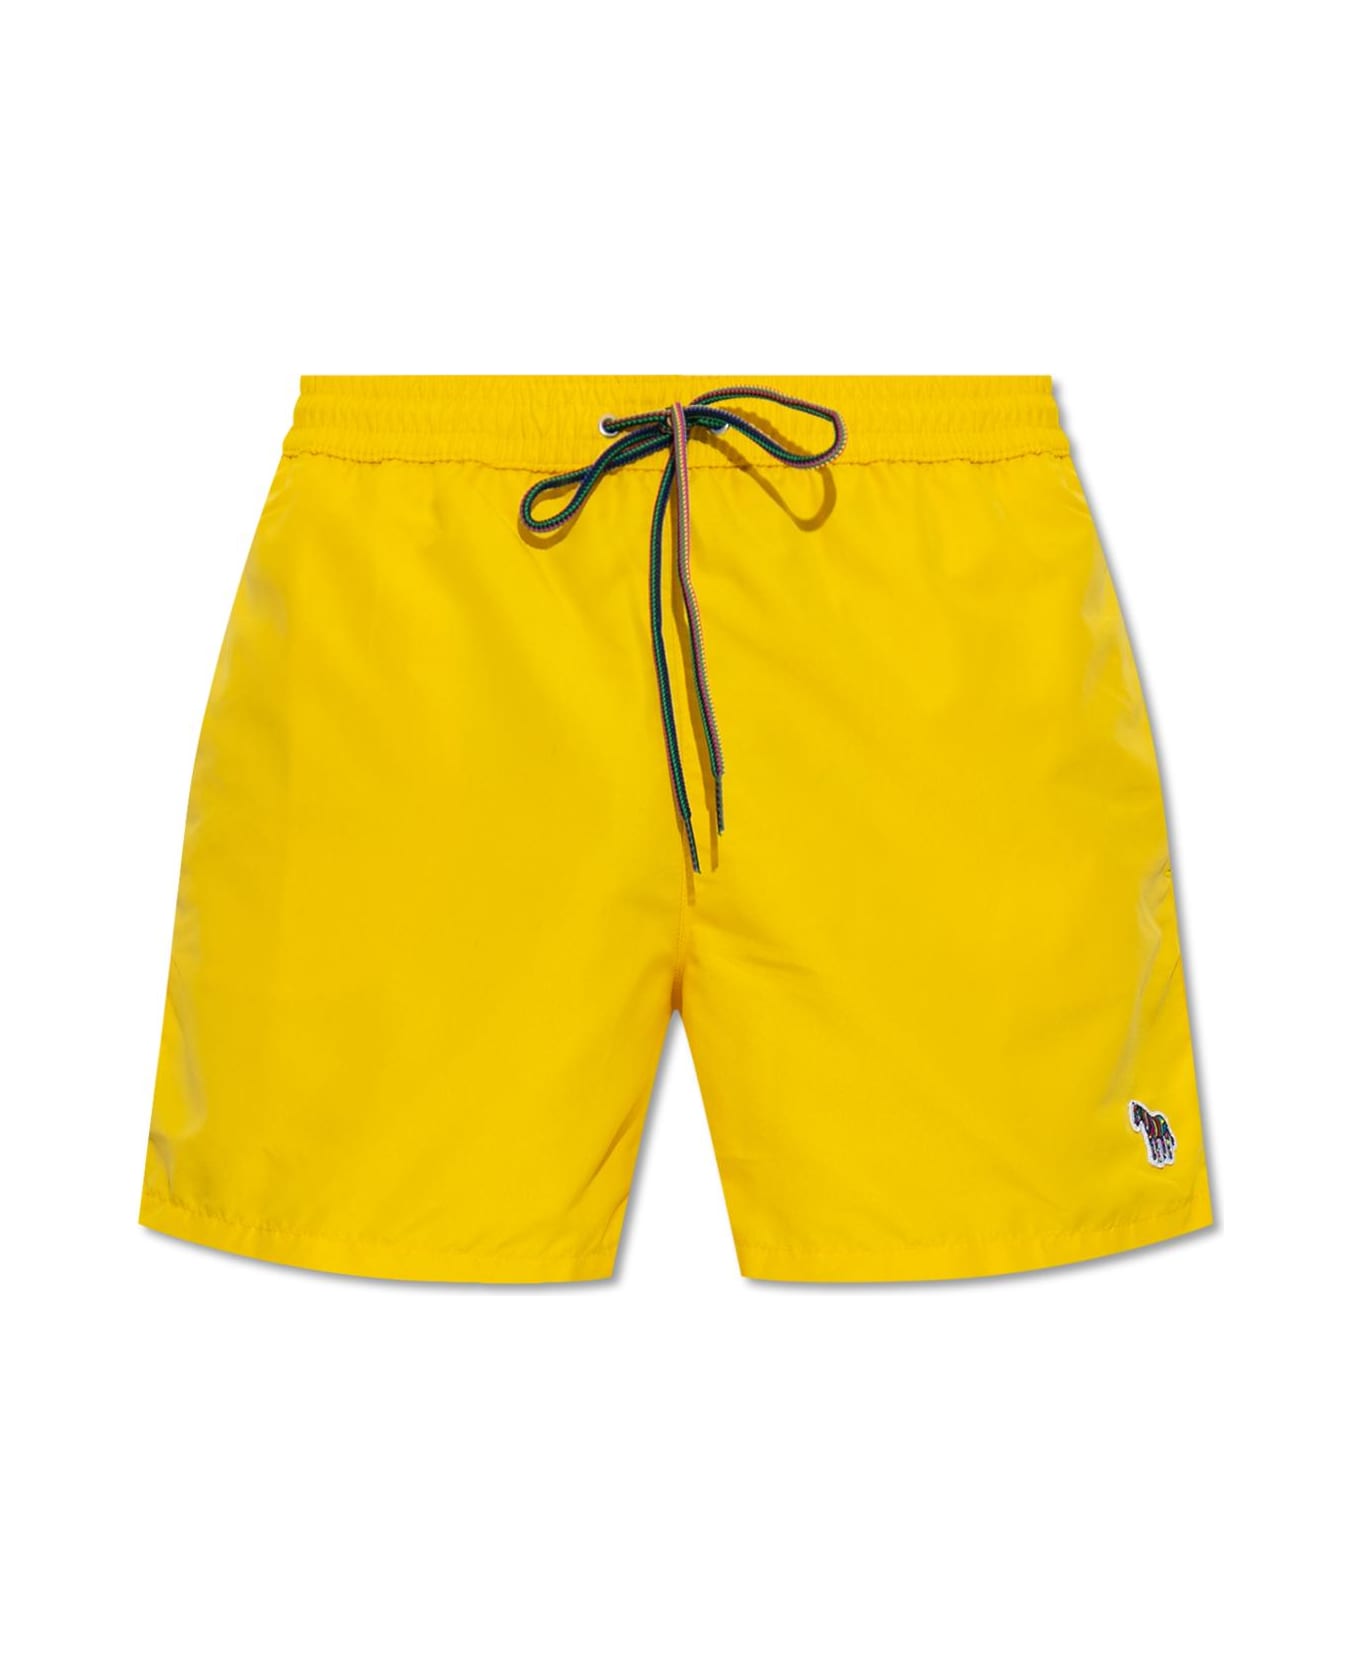 Paul Smith Swimming Shorts With Patch - Yellow